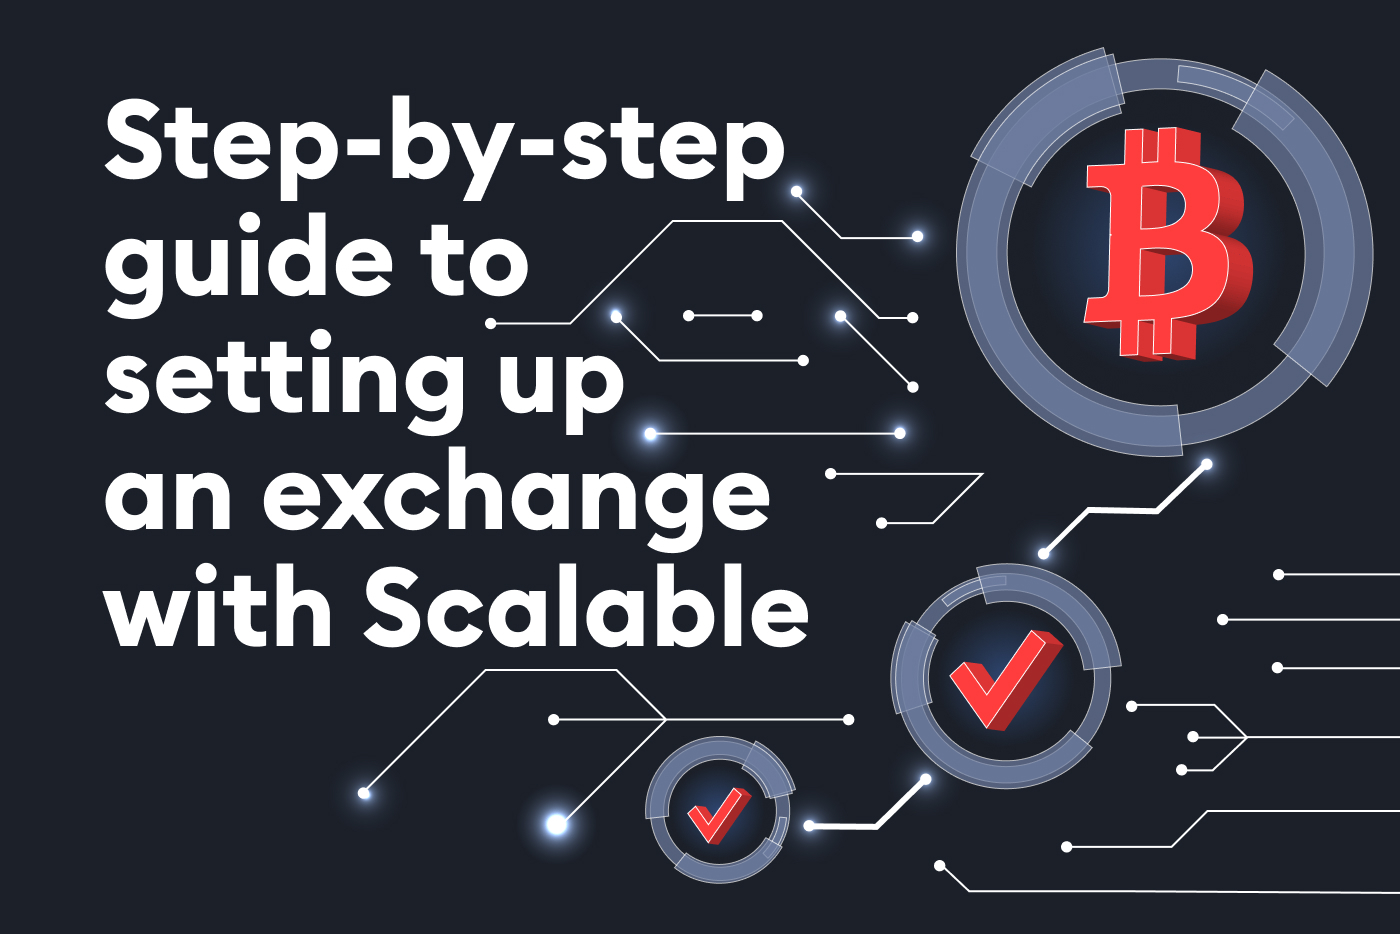 Step-by-step guide to setting up an exchange